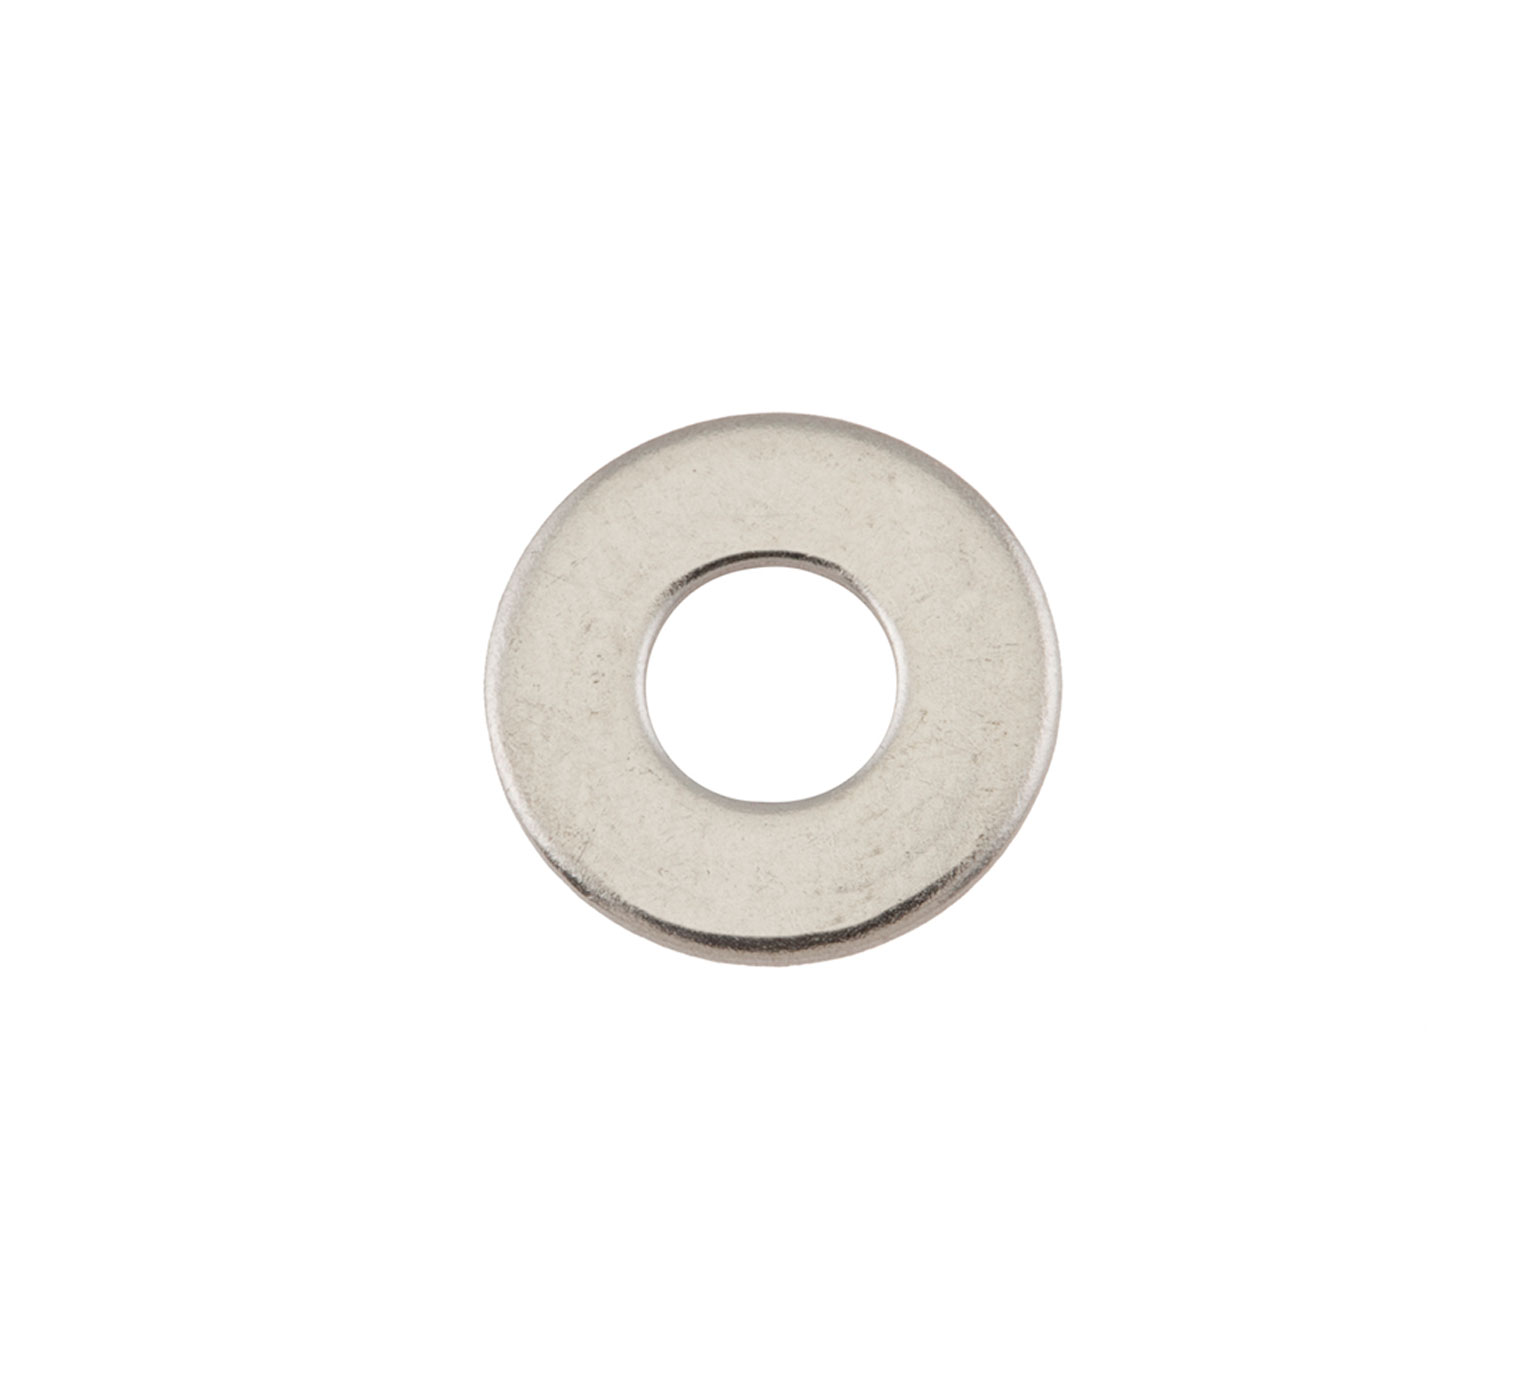 01683 Stainless Steel Washer - 0.219 ID x 0.5 OD x 0.049 in alt 1